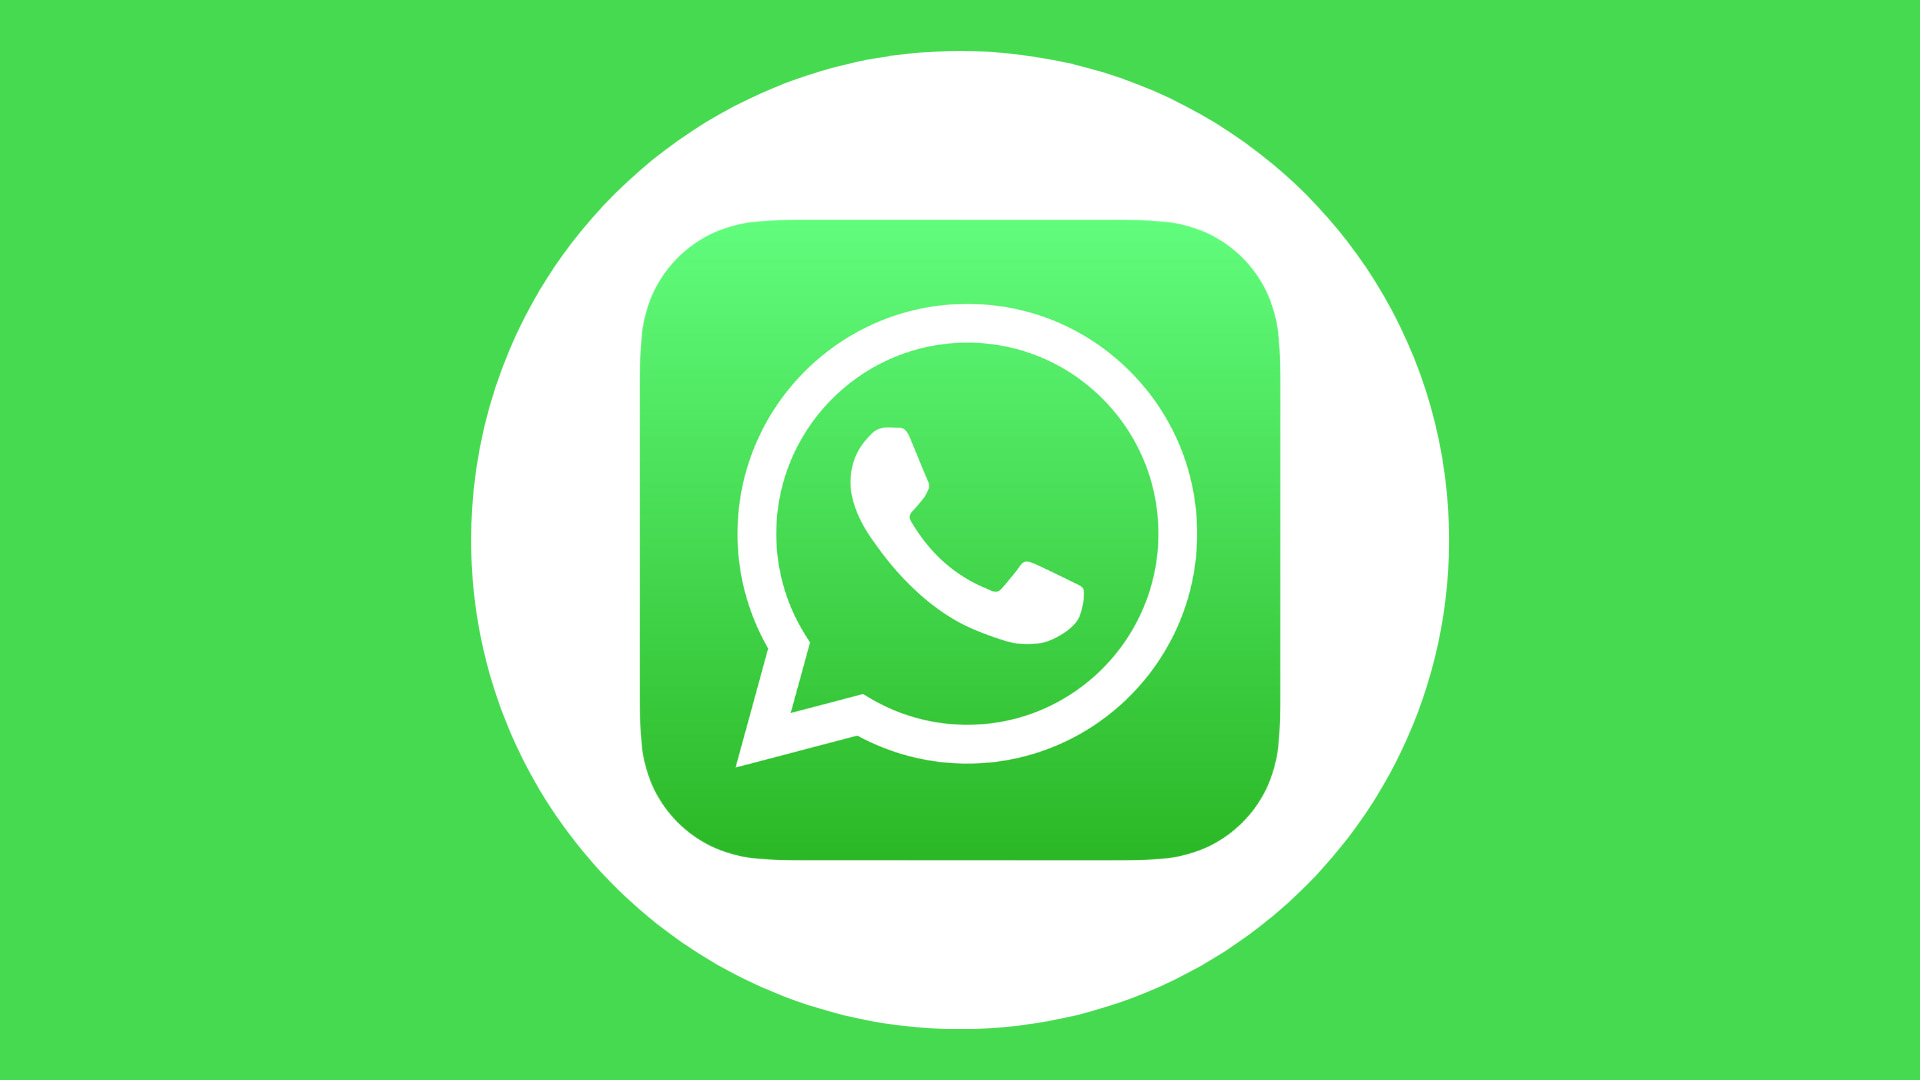 The icon of the WhatsApp mobile app inside a solid white circle, set against an all-green background 